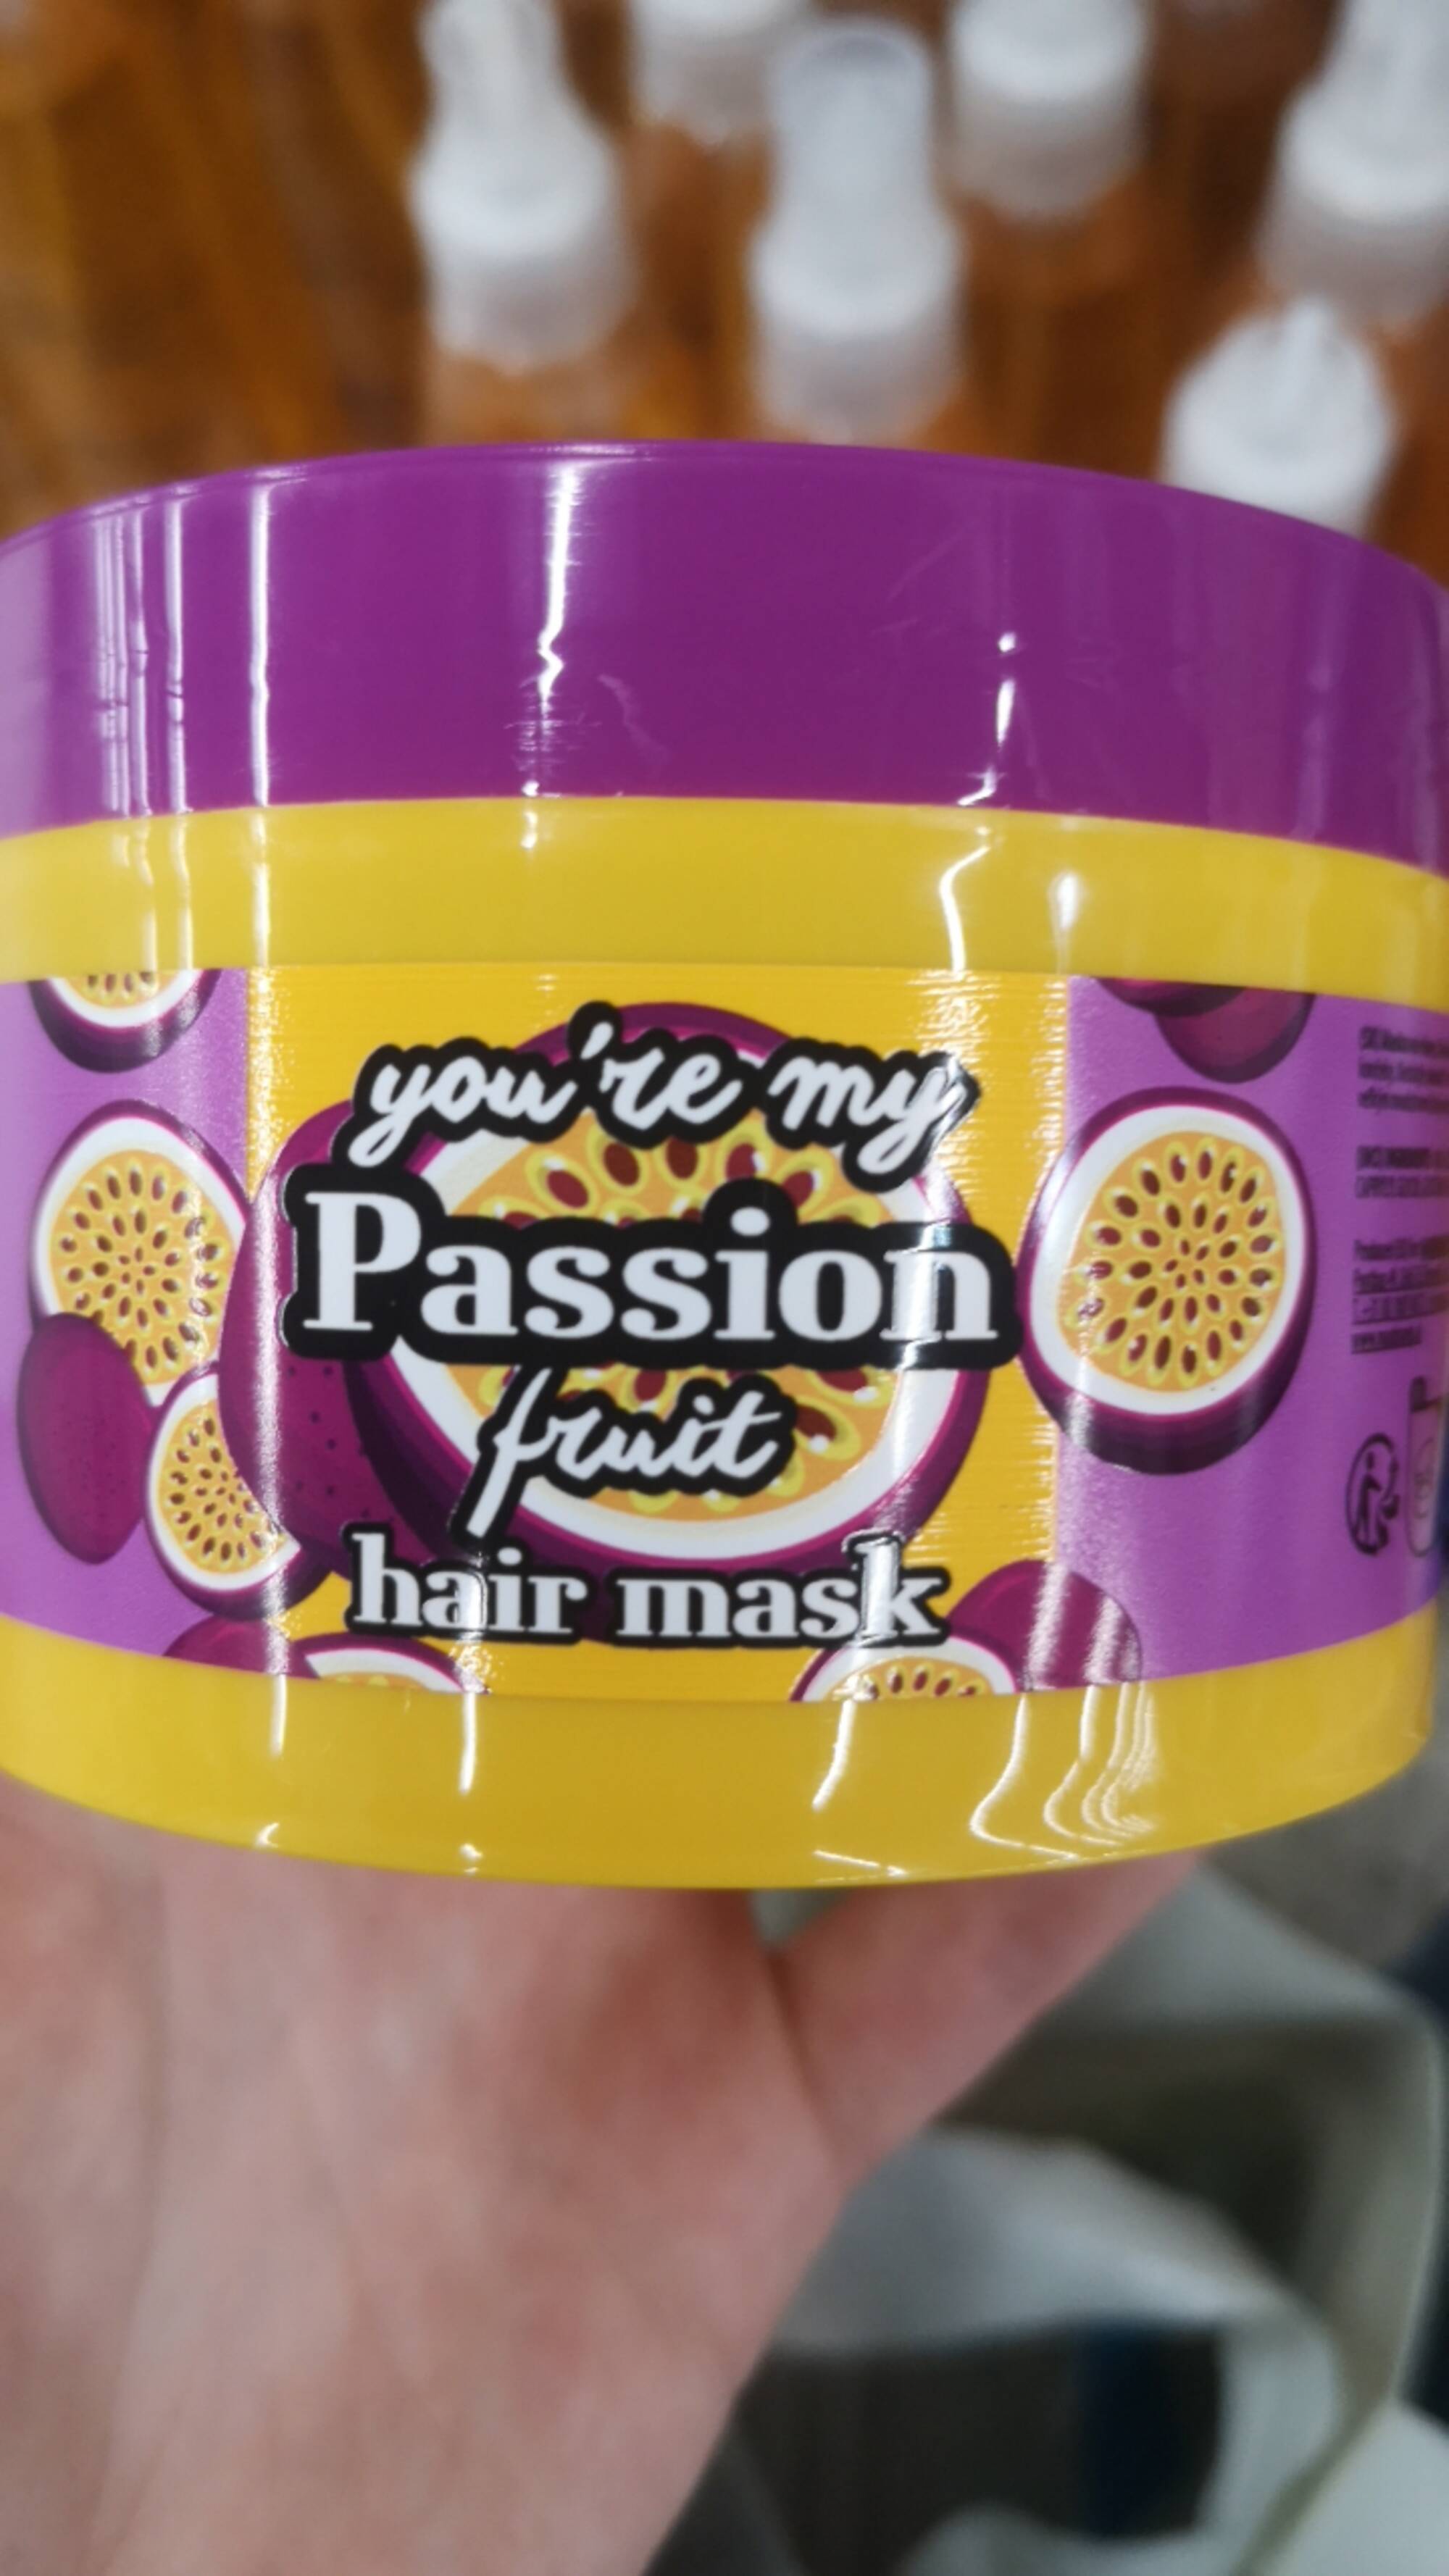 MAXBRANDS MARKETING B.V. - You're my passion fruit - Hair mask